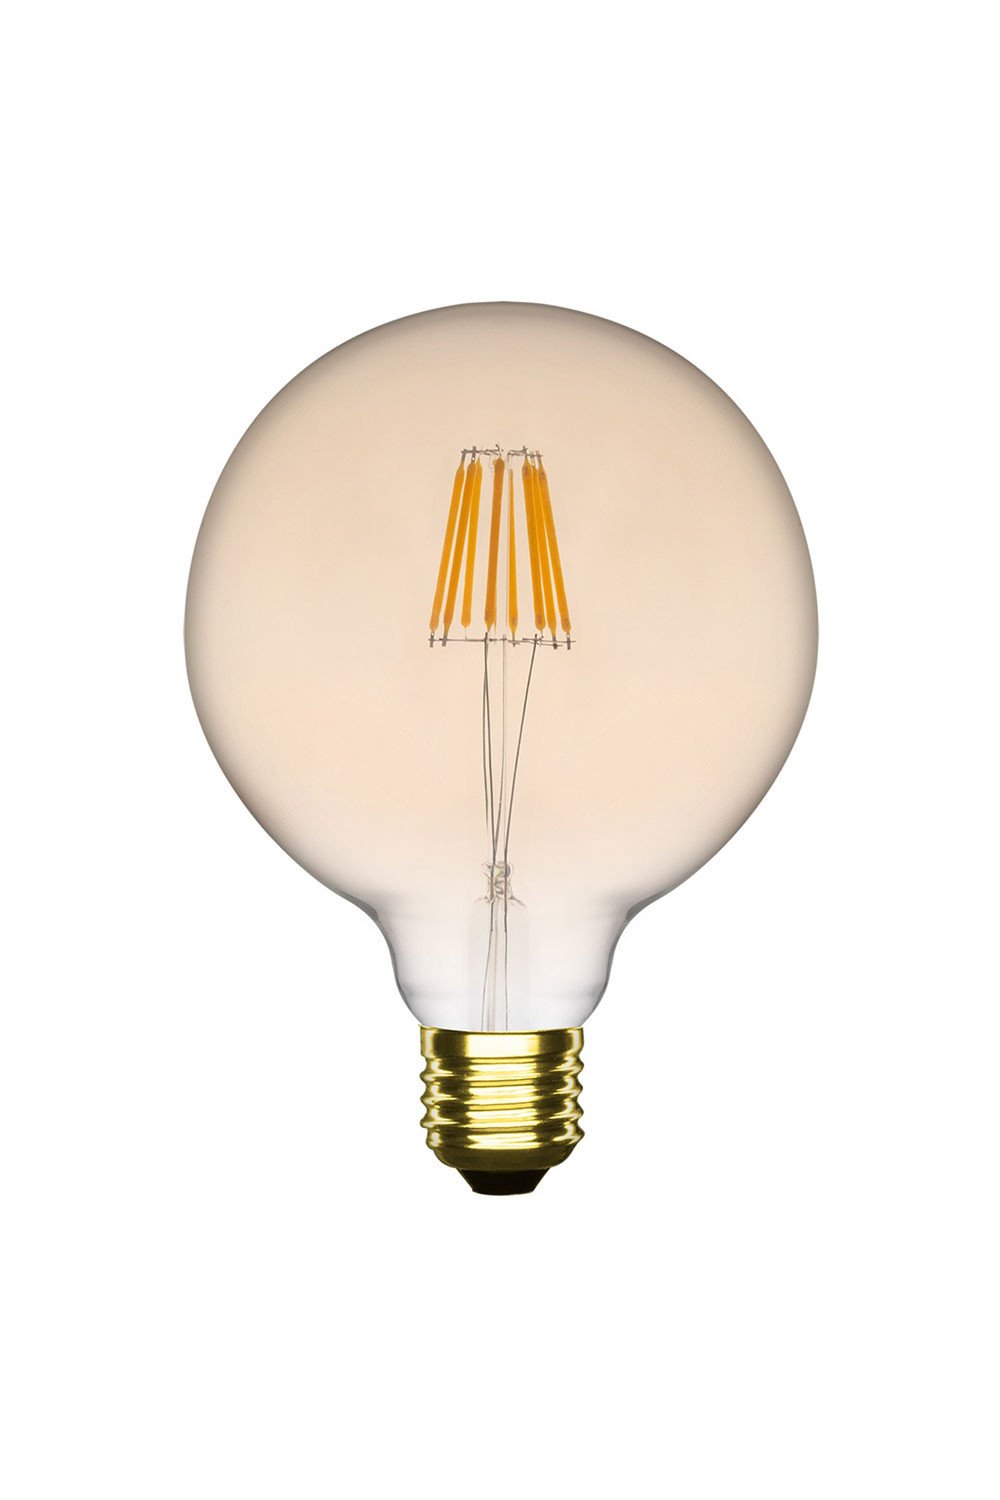 Dimmable Vintage LED Bulb E27 Gradient Spher, gallery image 1